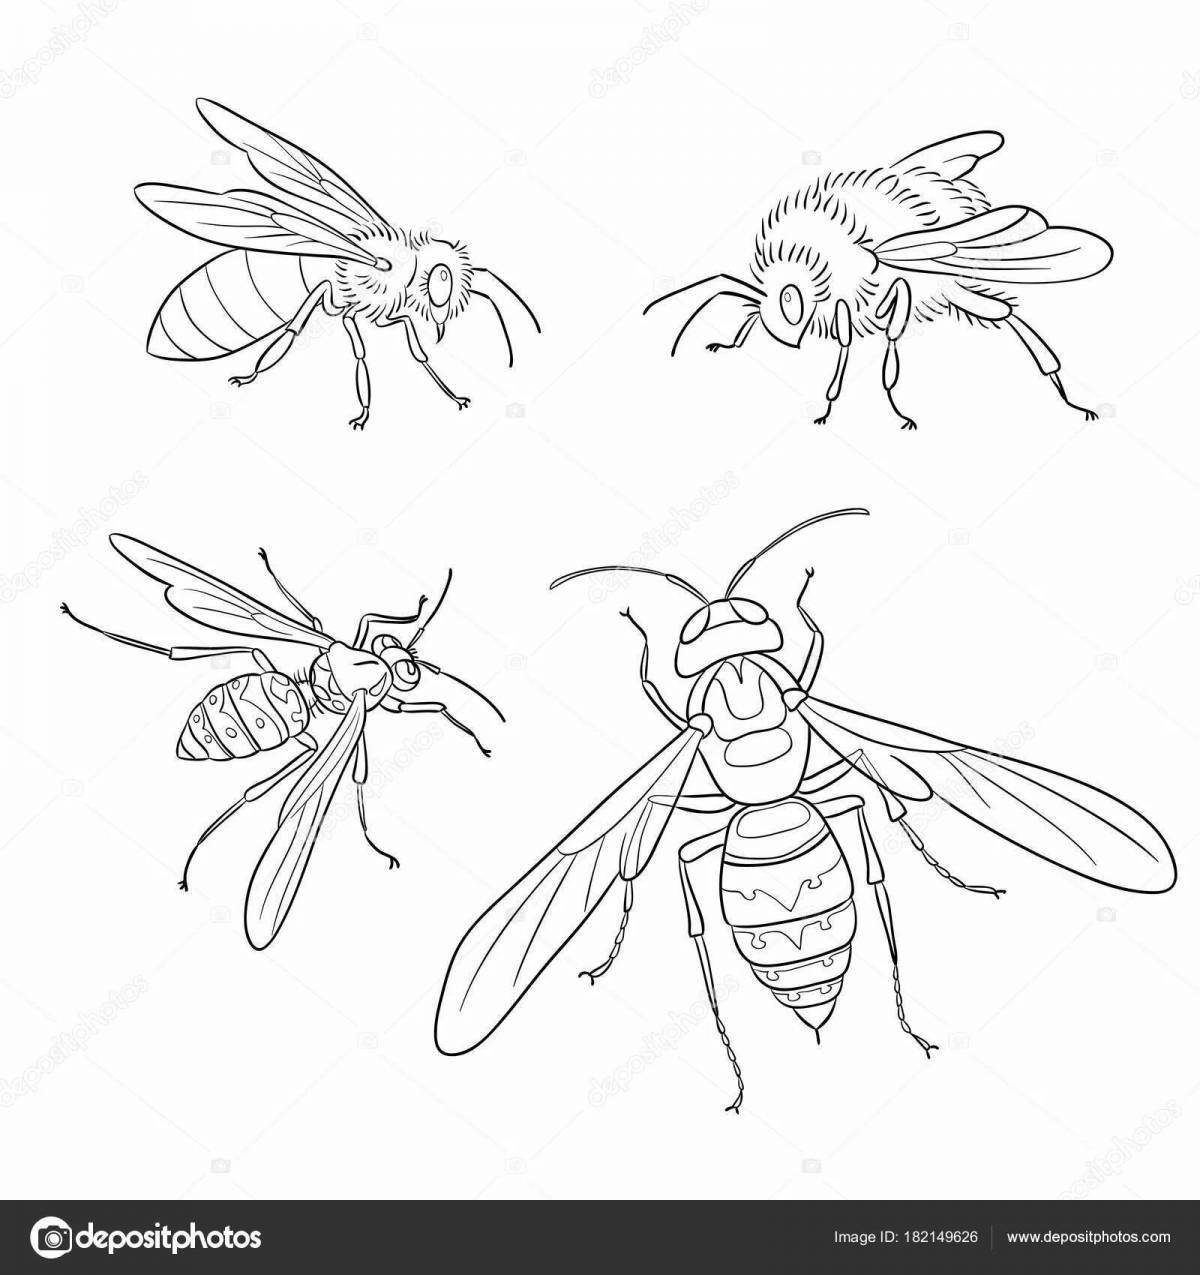 Playful coloring of the insect class